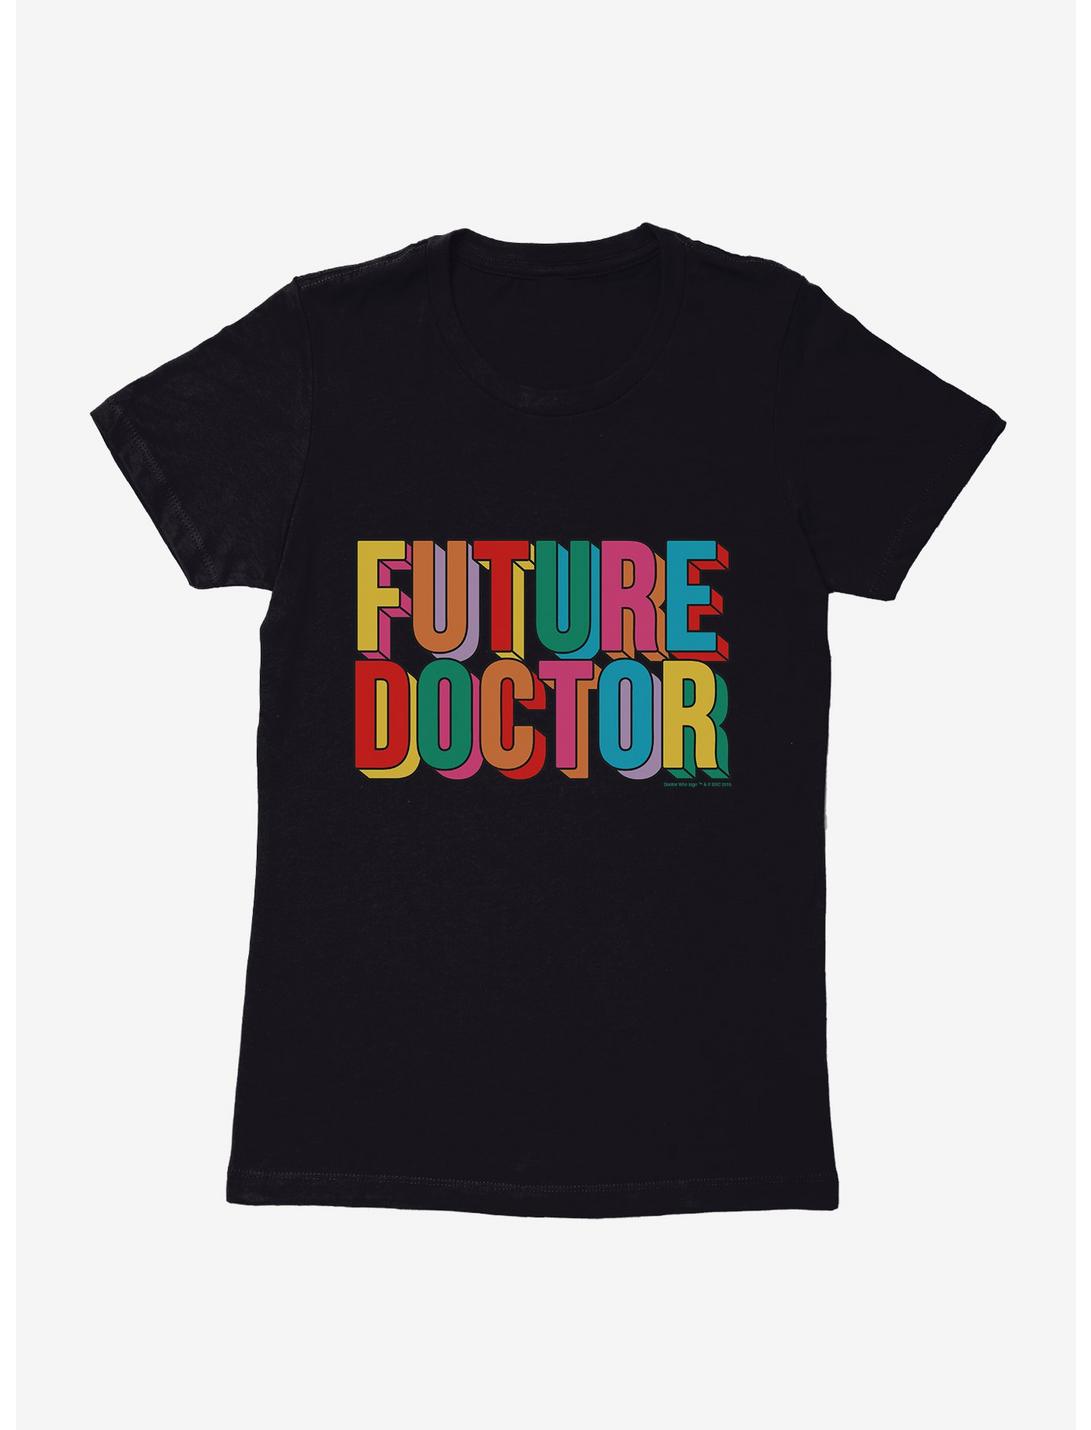 Doctor Who Thirteenth Doctor Future Doctor Womens T-Shirt, BLACK, hi-res